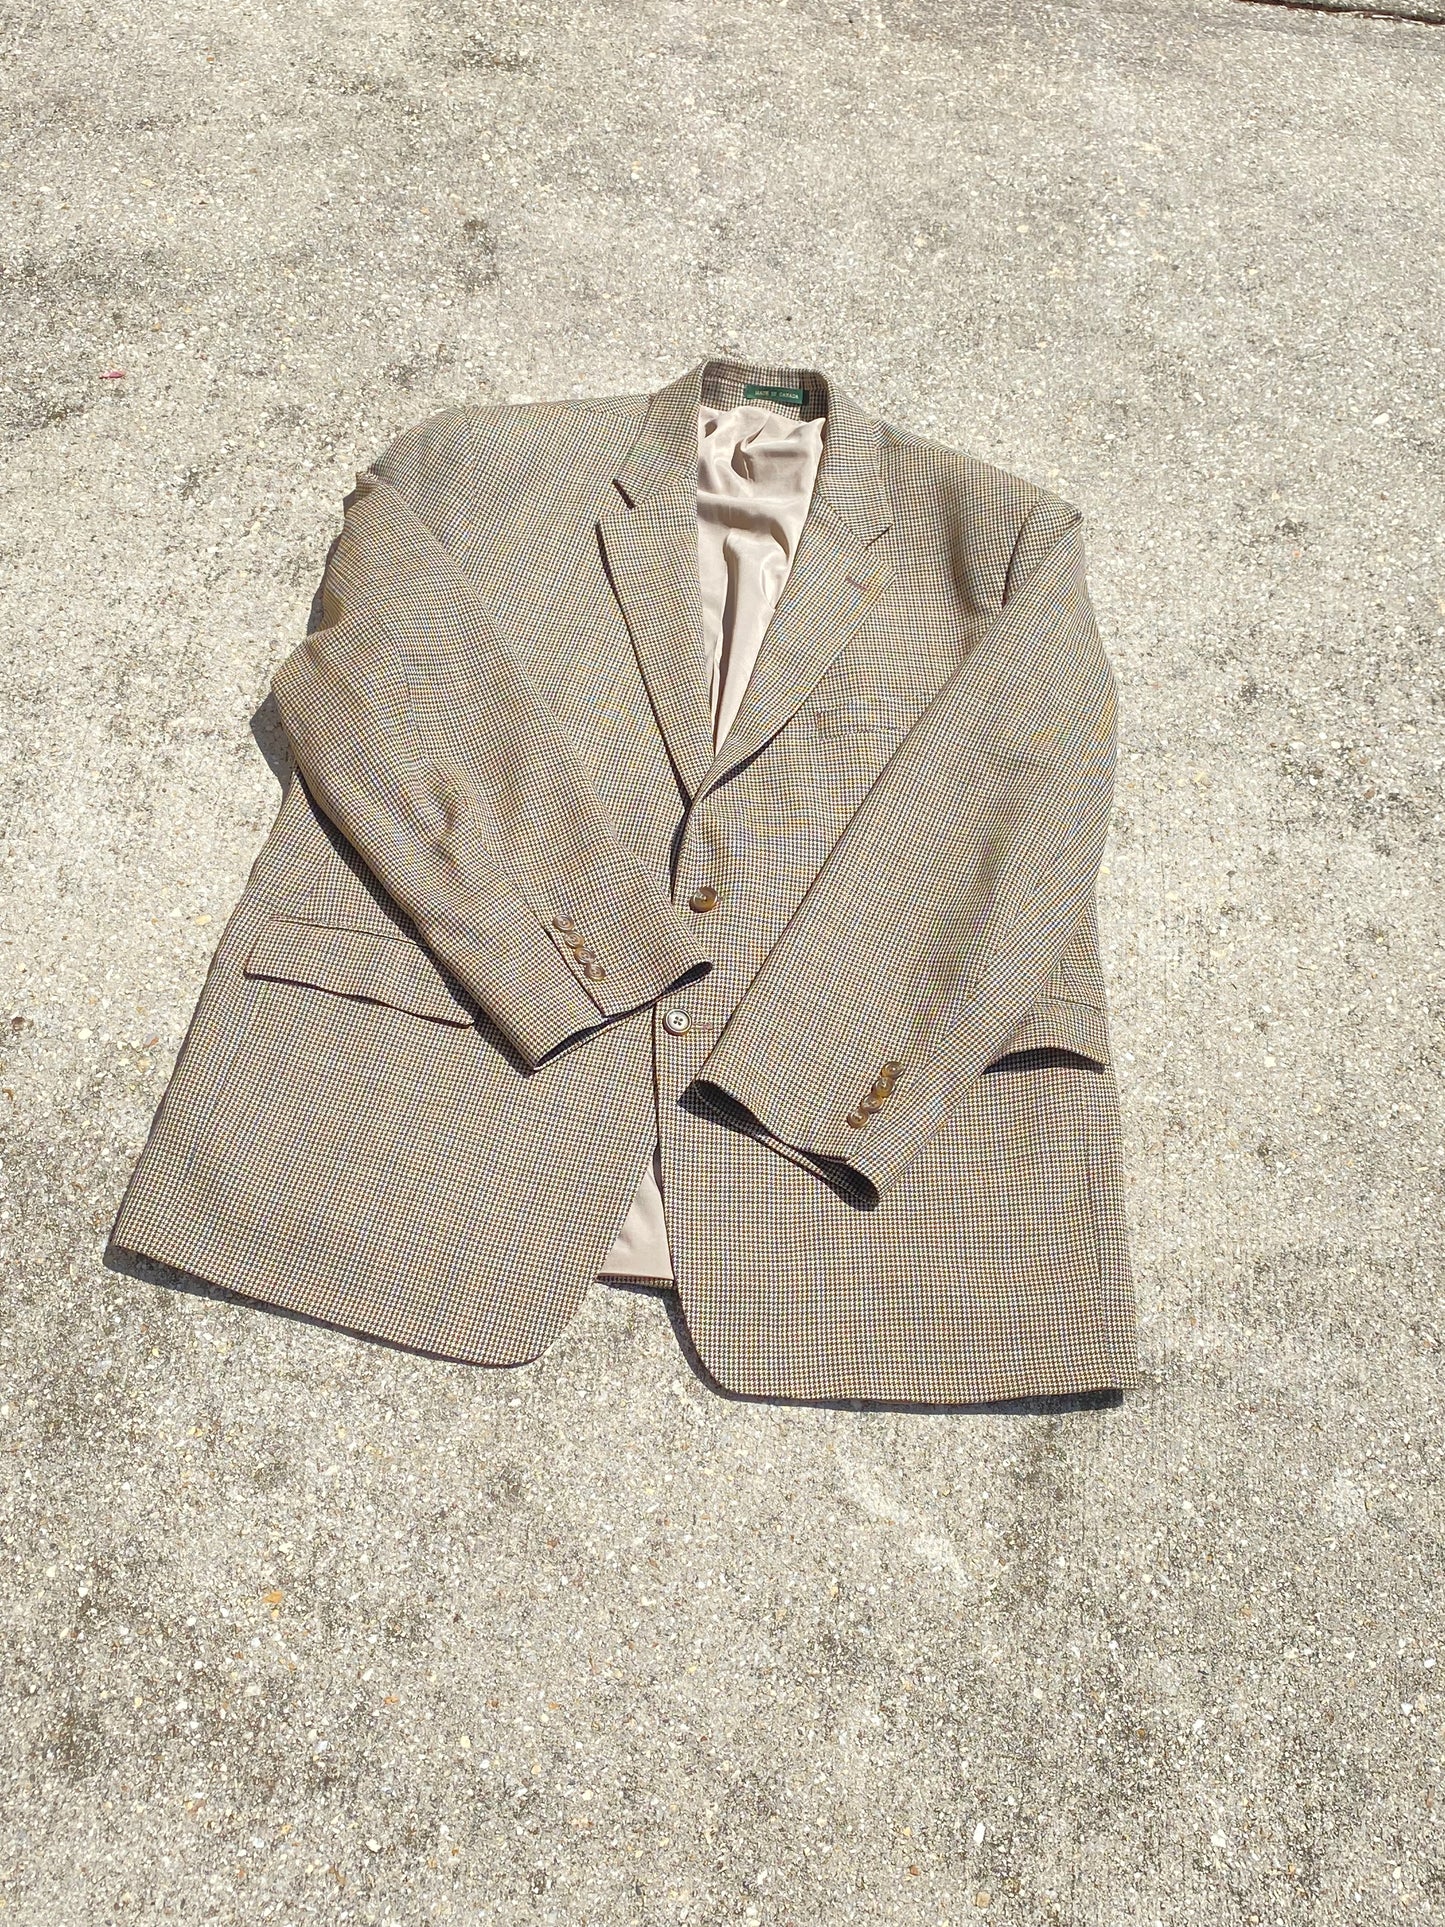 Polo Ralph Lauren Brown Houndstooth Jacket - Brimm Archive Wardrobe Research